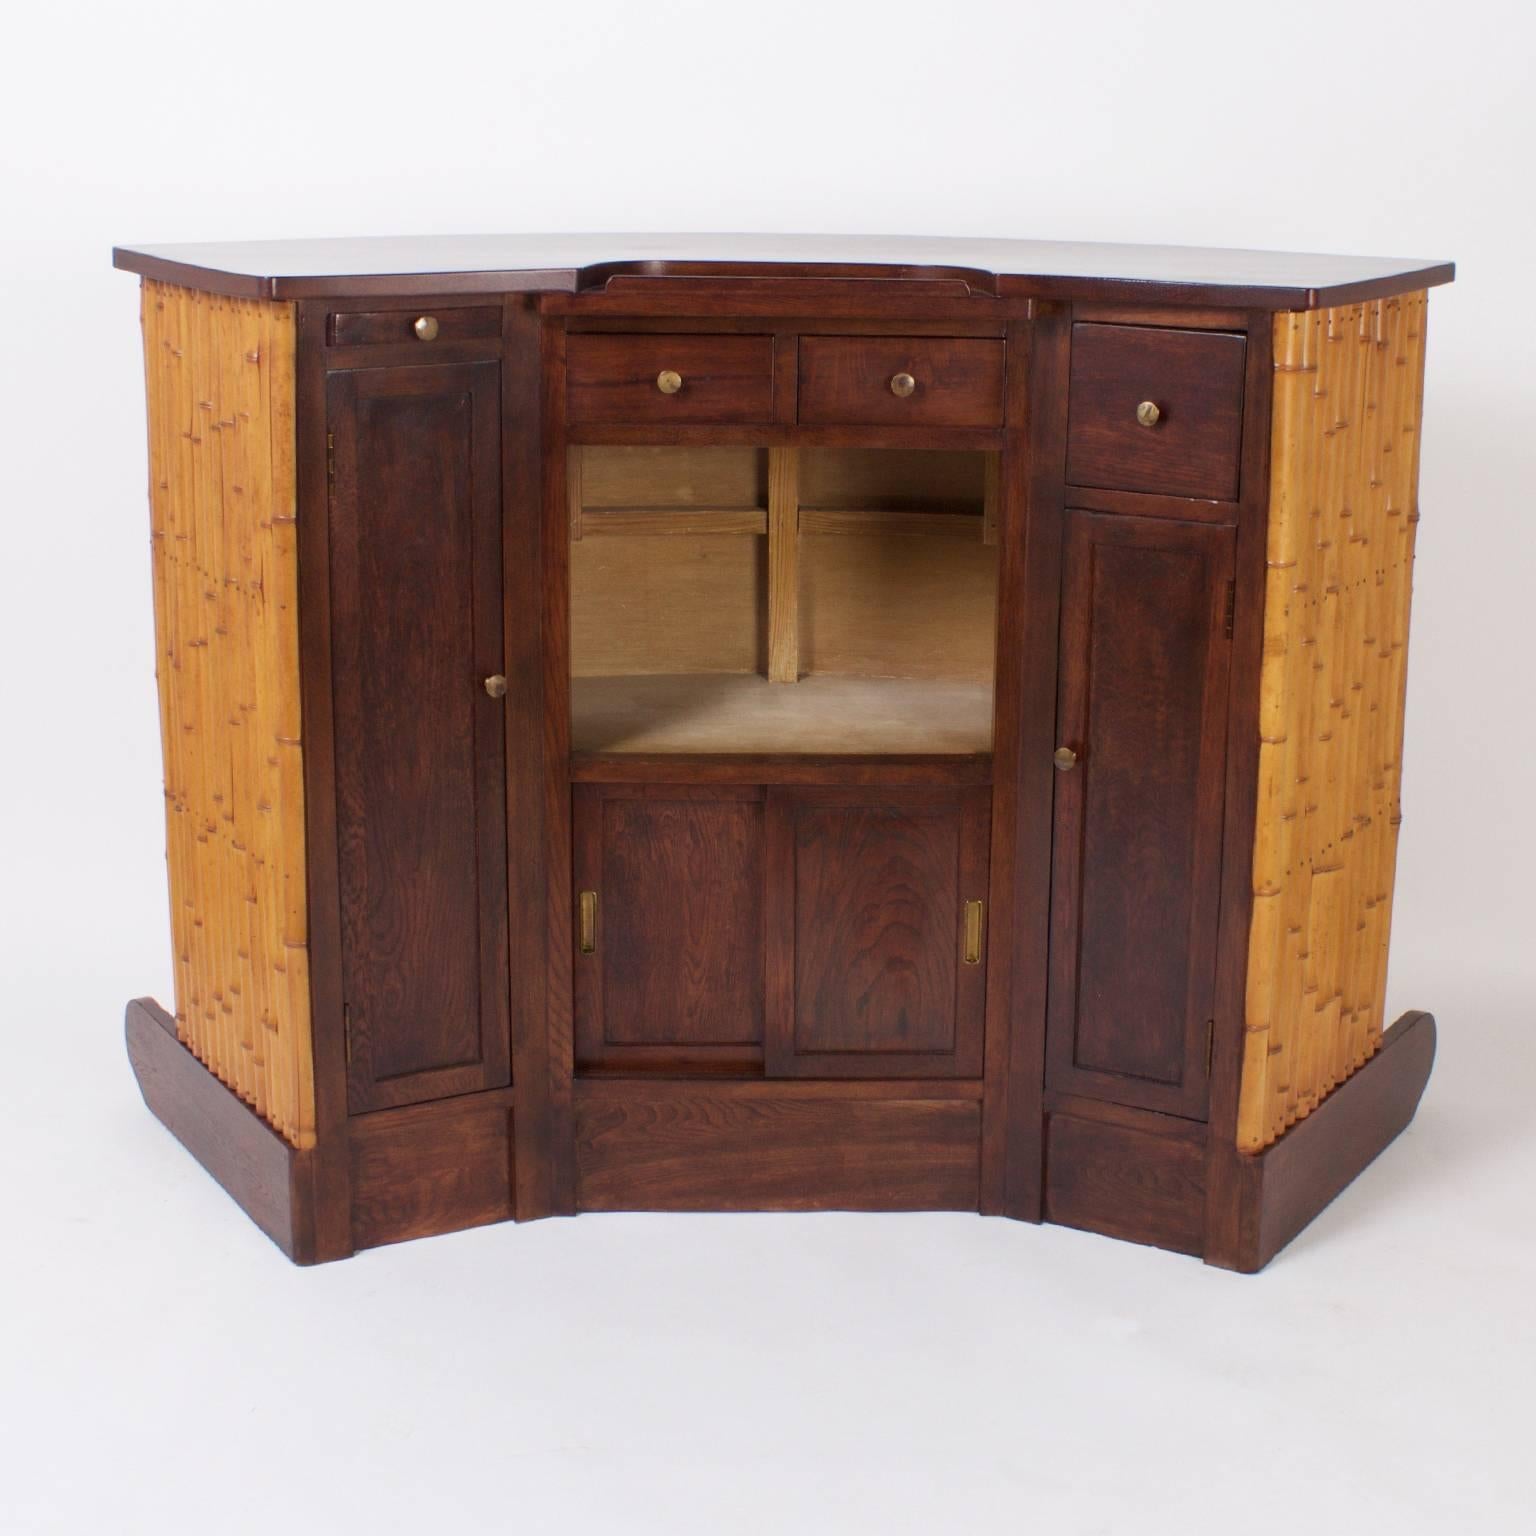 Sophisticated 1940s bamboo or rattan tiki bar expertly crafted with an oak top and base with a brass footrest. The service area in the back features a zinc lined ice drawer, slide out cutting board, and over all yacht like aesthetics.